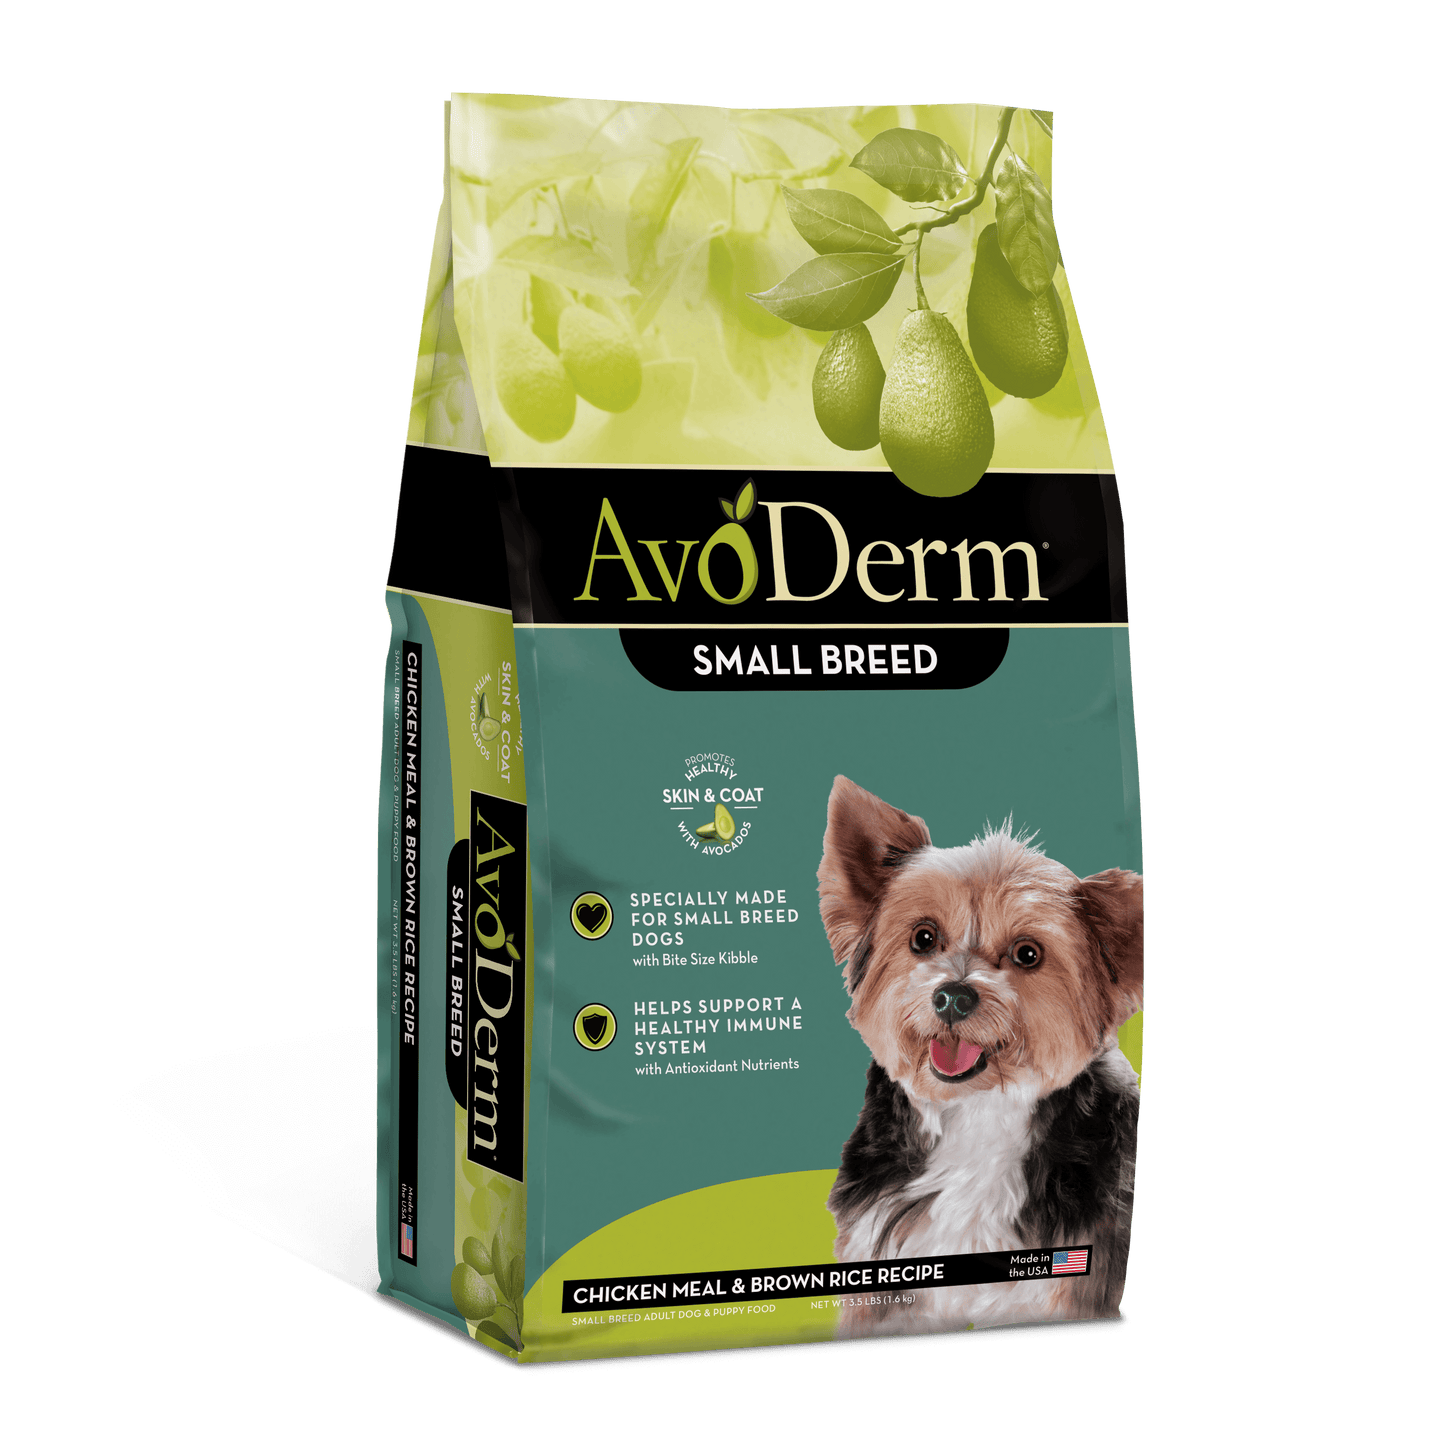 AvoDerm® Small Breed Chicken Meal & Brown Rice Recipe, Dry Dog Food, 3.5-lb Bag